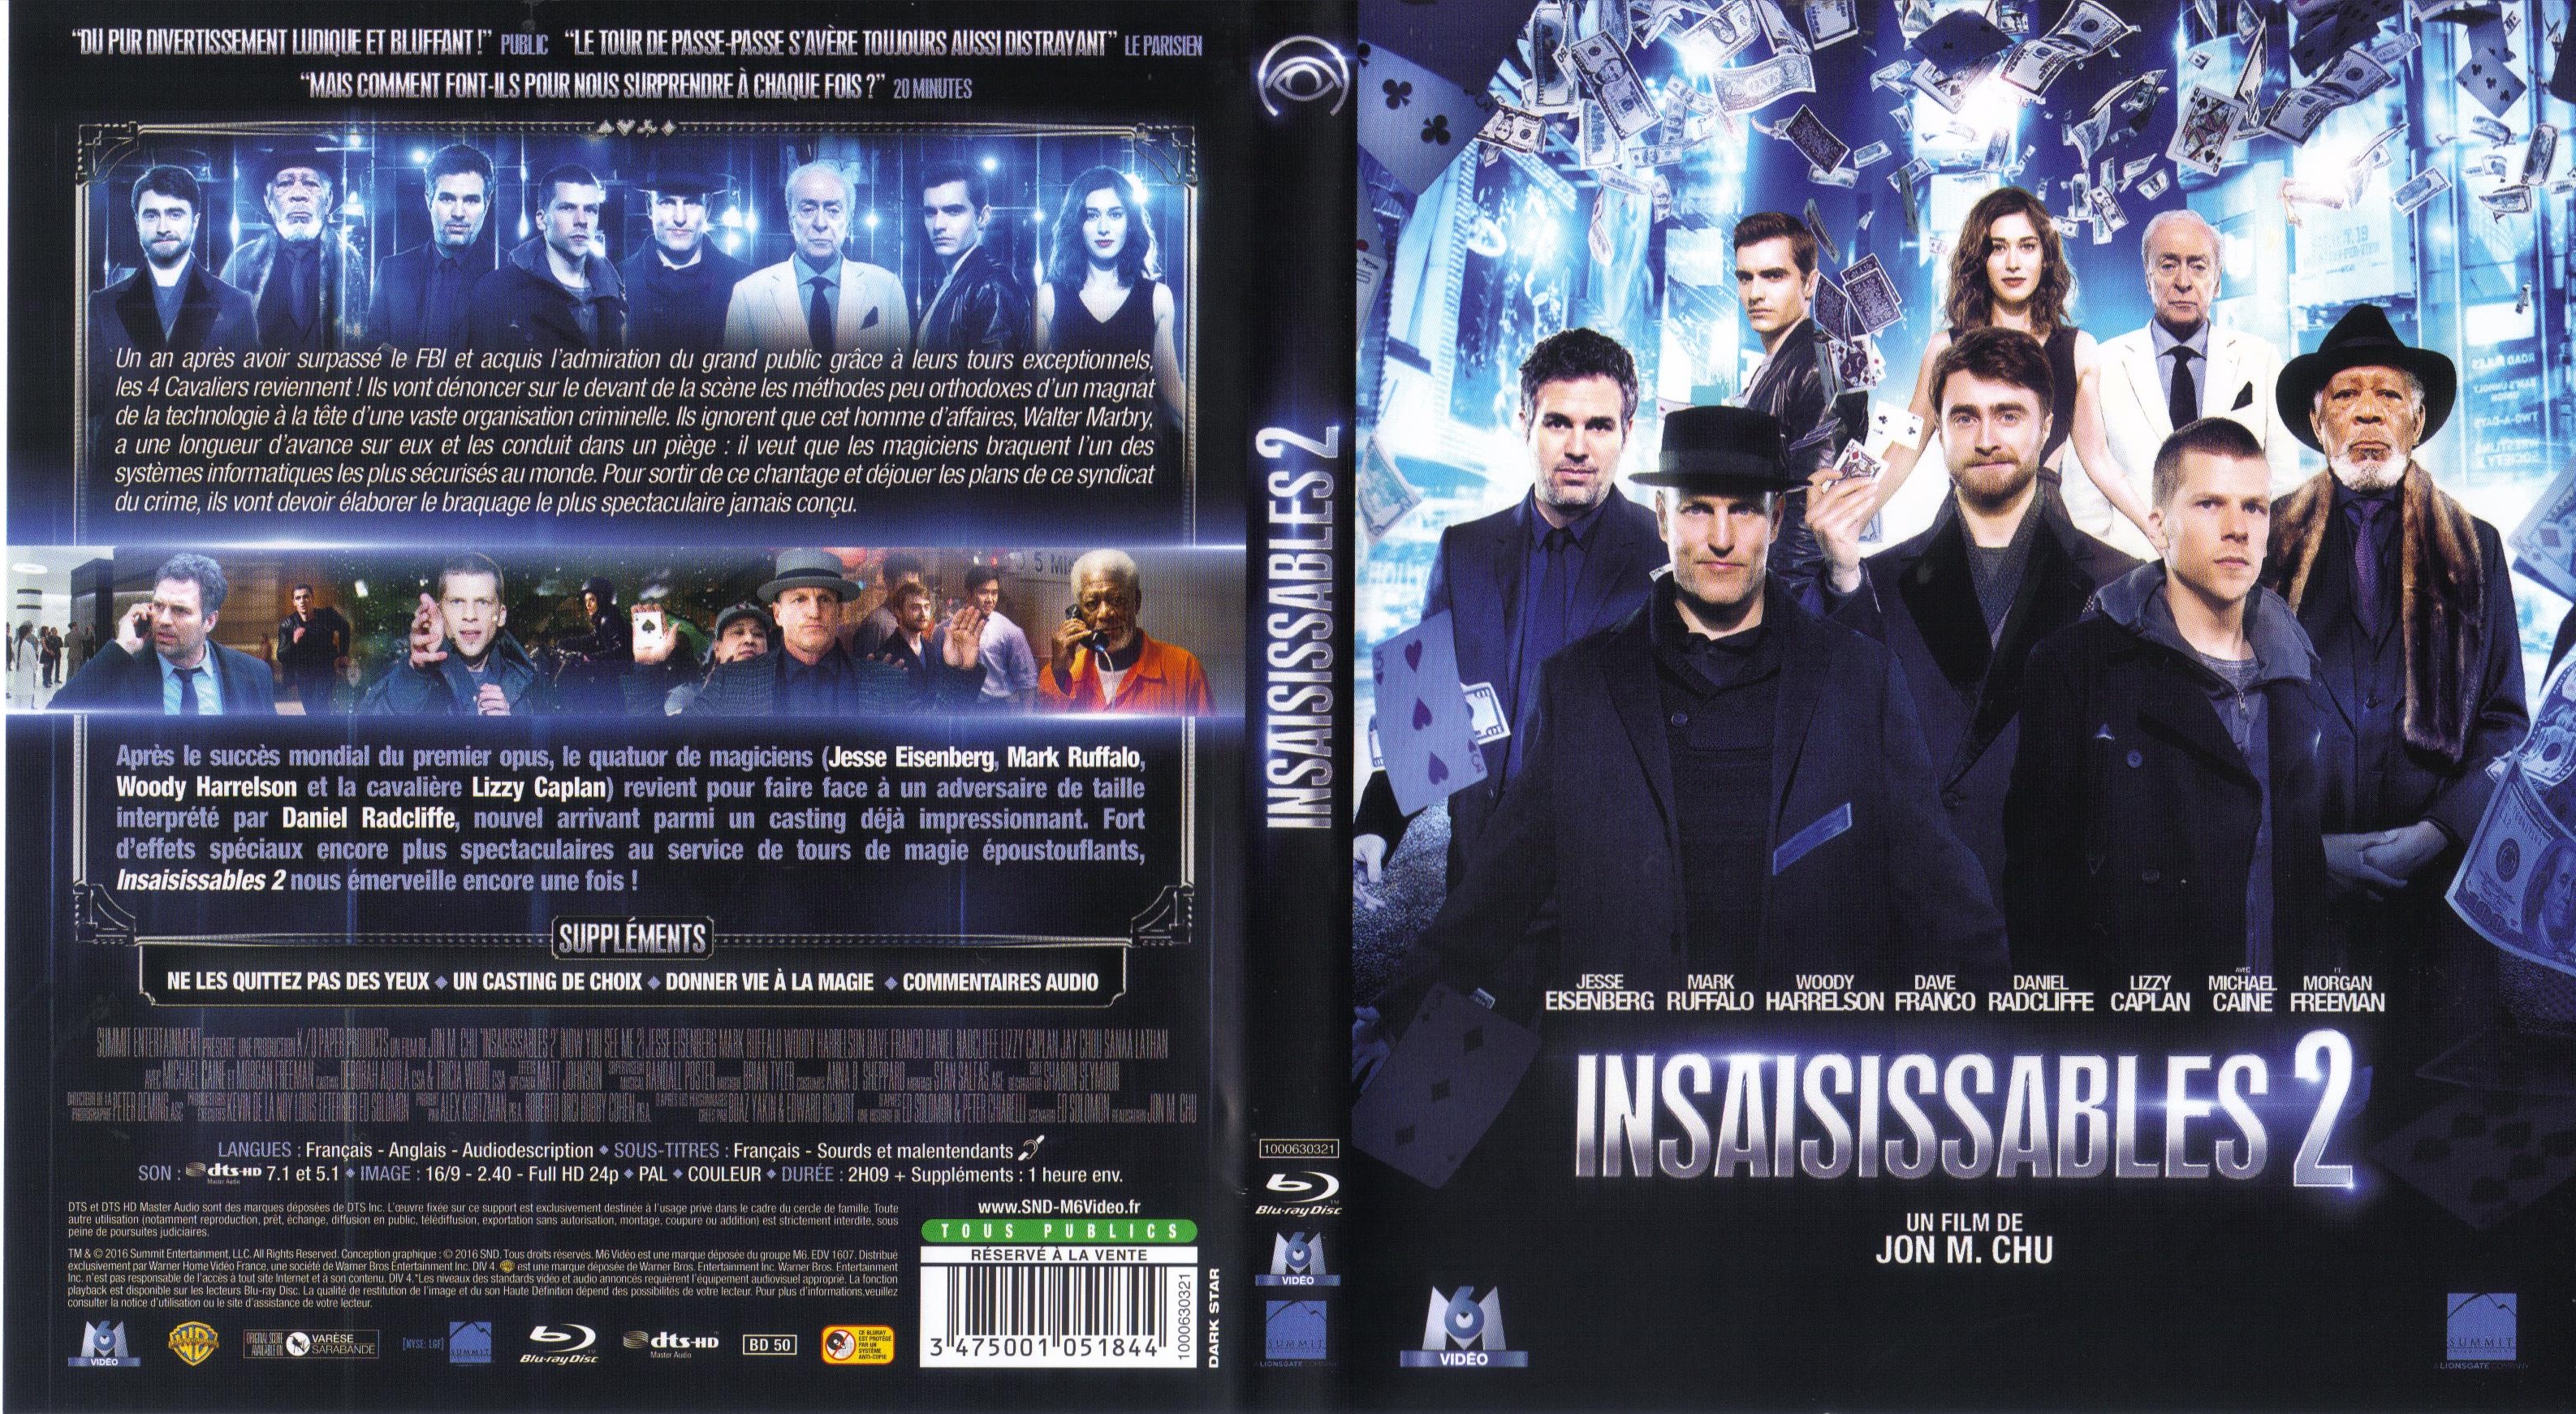 Jaquette DVD Insaisissables 2 (BLU-RAY) v2